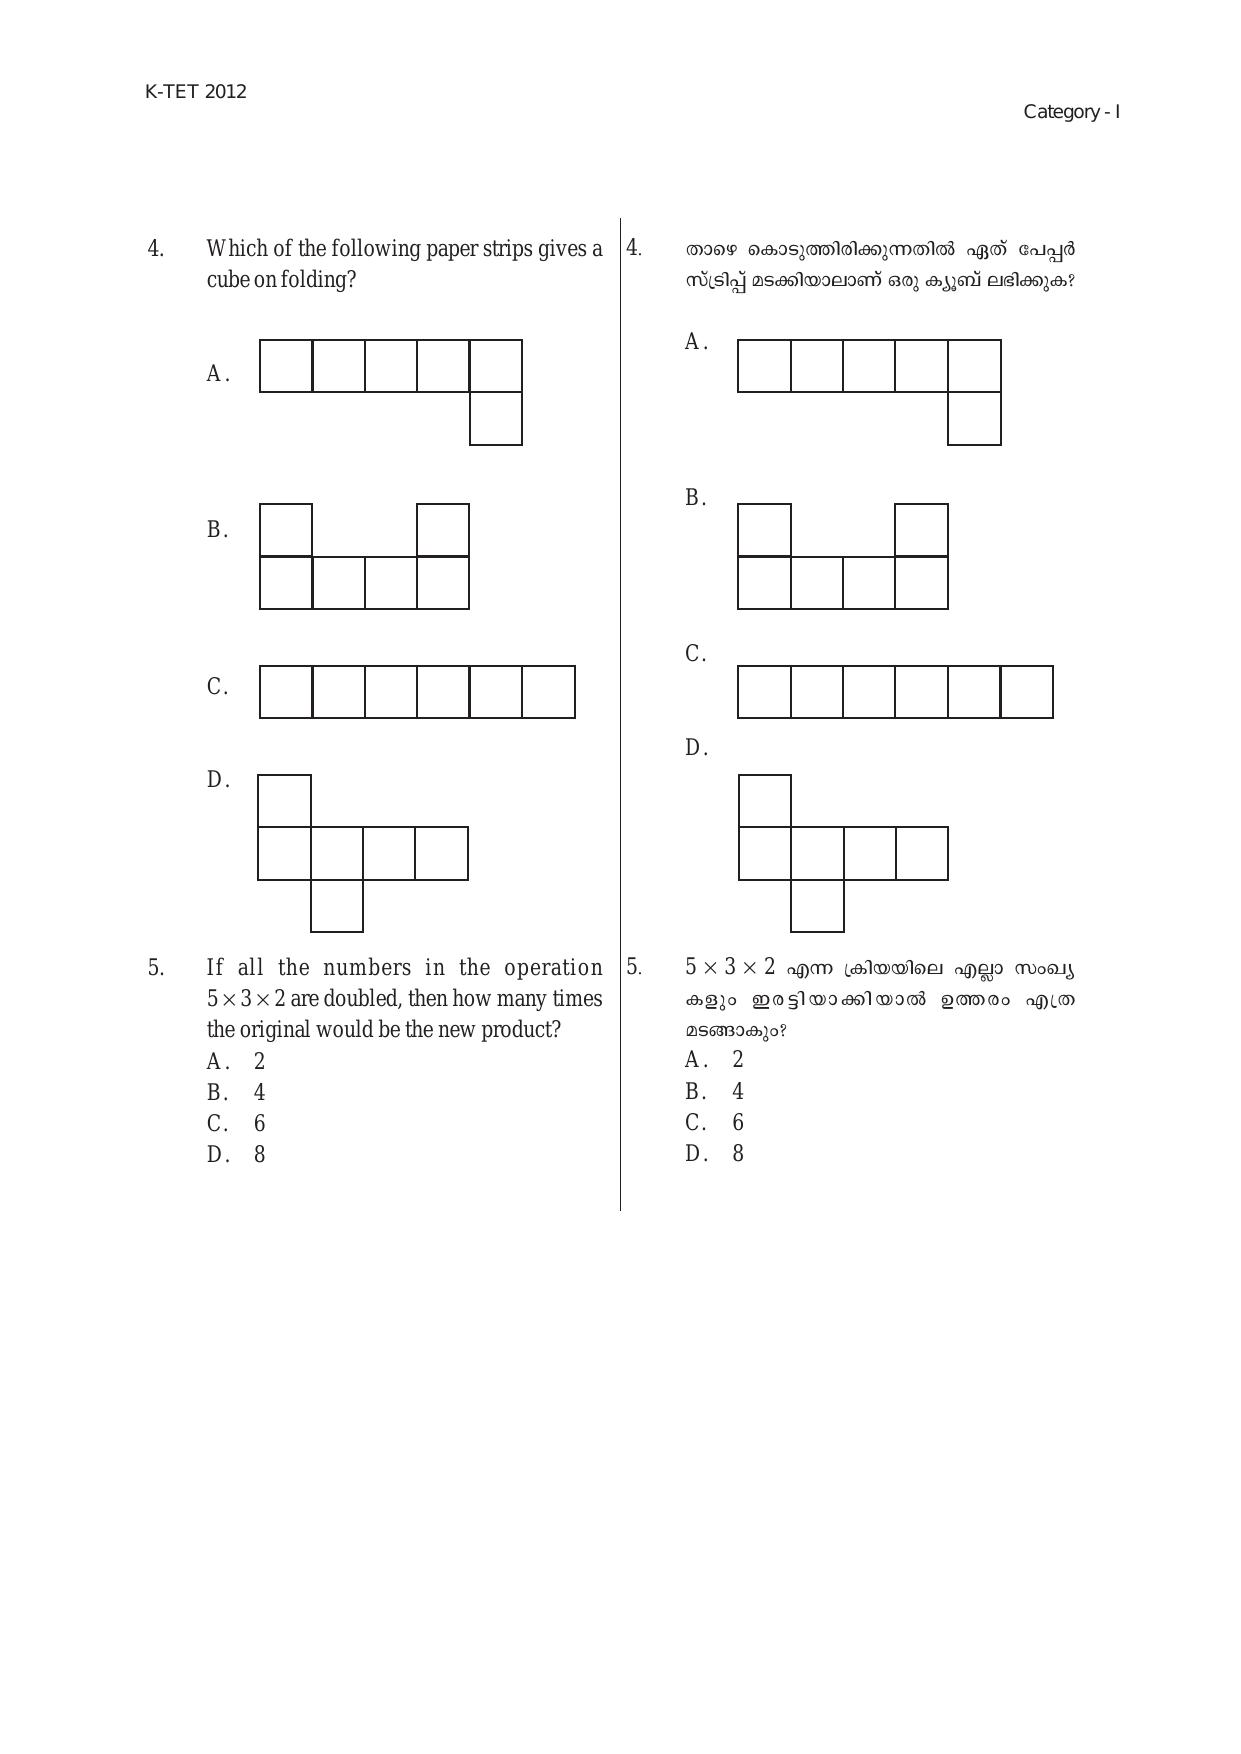 KTET Category 1 - Lower Primary Teacher (Class 1-5) Exam Old Papers - Page 13